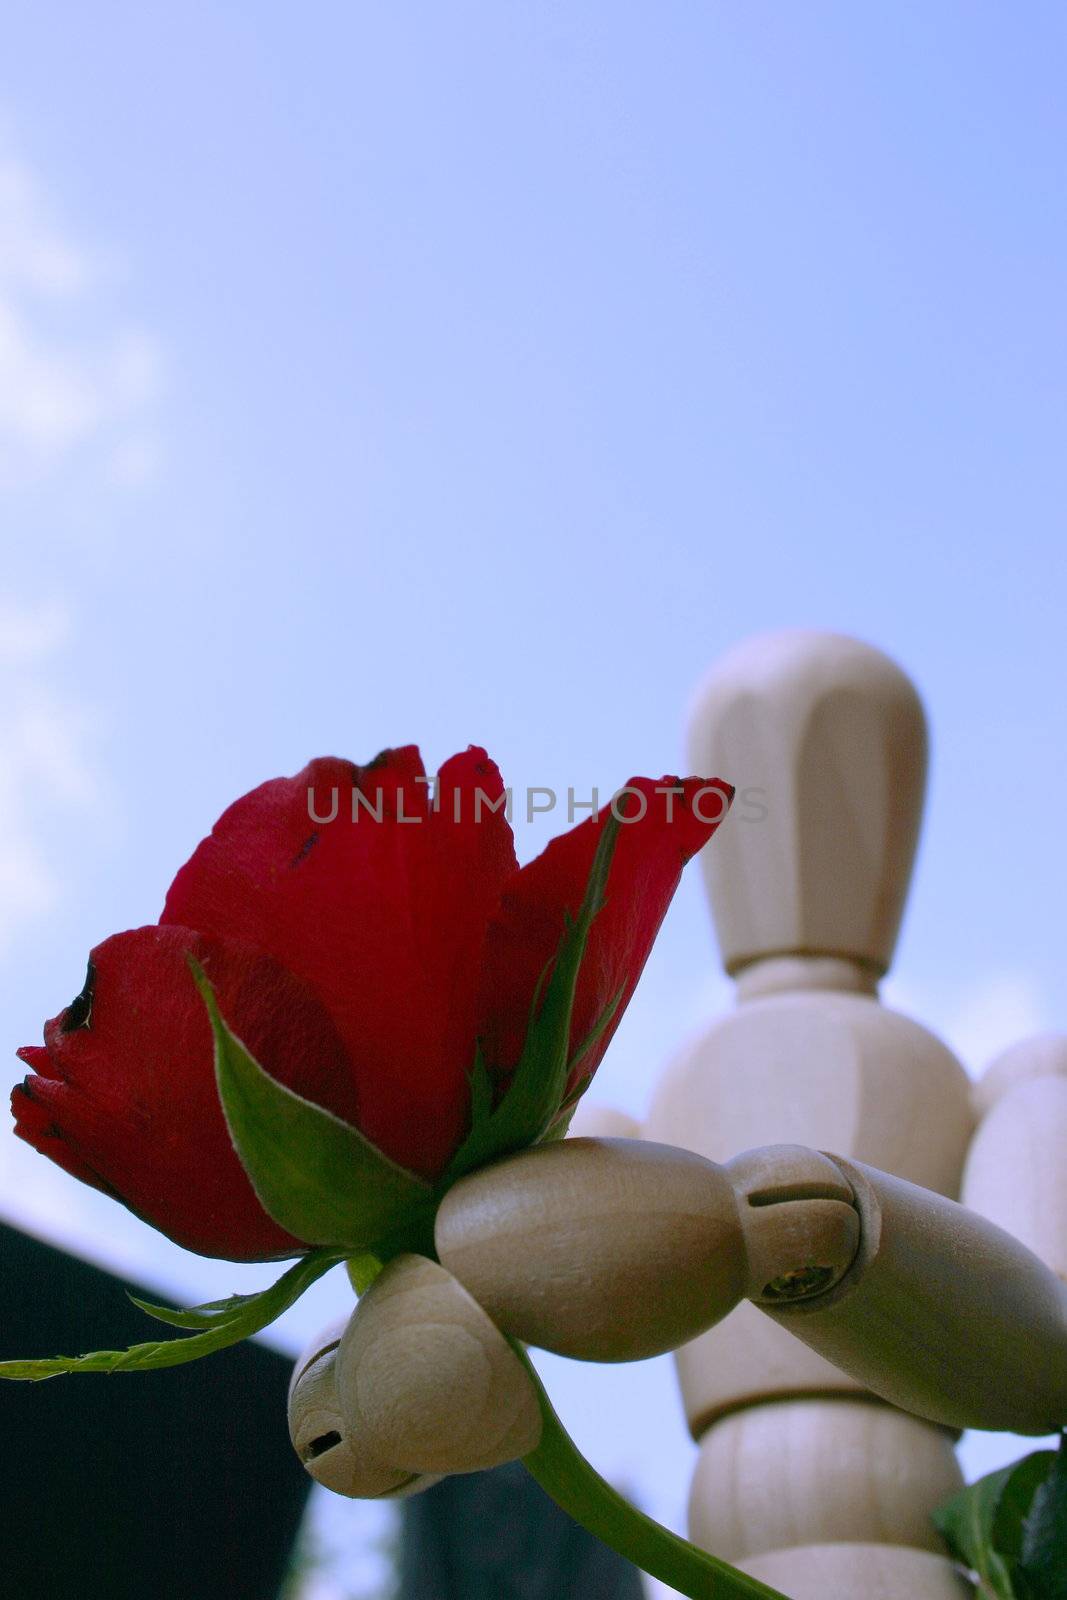 mannequin holding out  a red rose on valentines day